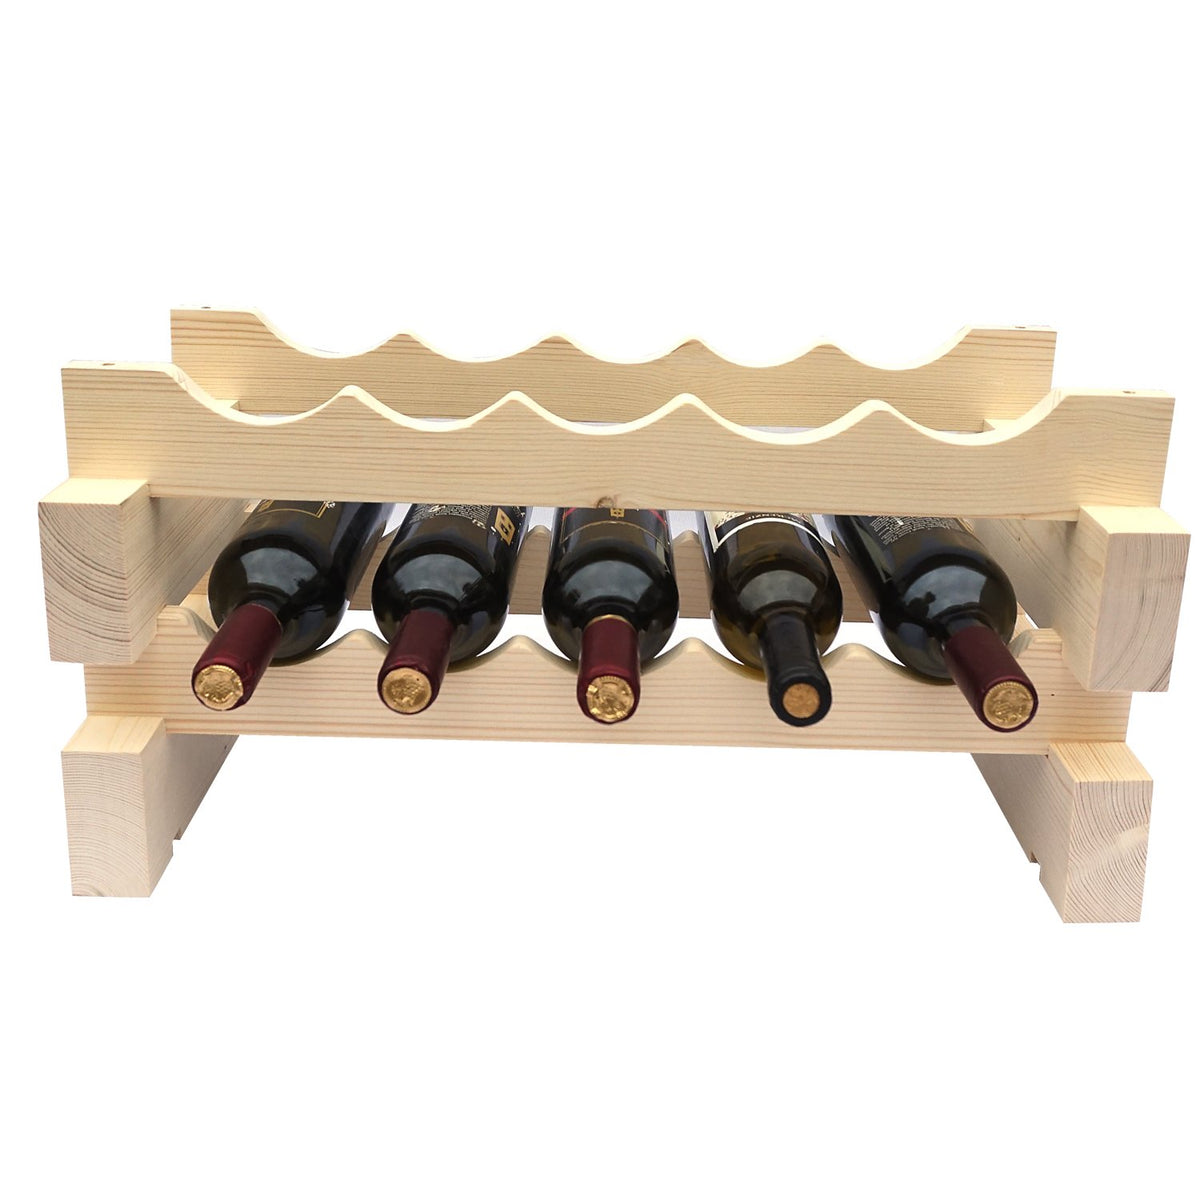 4 Bottle Modular Wine Rack Kit - New Zealand Pine - With Bottles - Front View